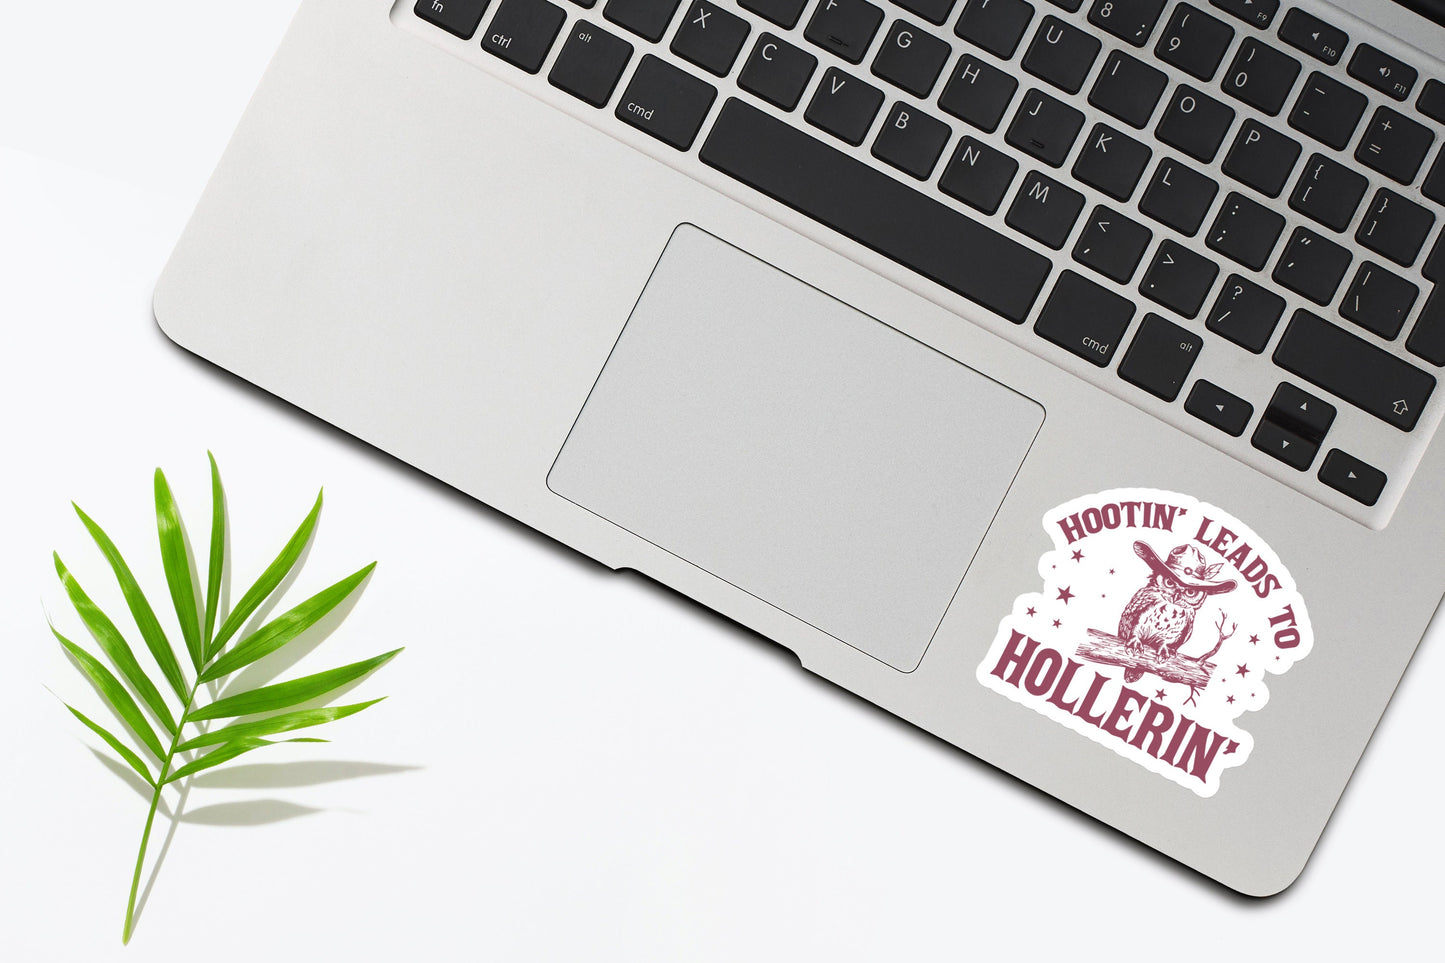 Hootin' Leads to Hollerin' Owl Sticker, Funny Western Sticker, Cowgirl Sticker, Country Sticker, Trendy Sticker, Sarcastic Saying Sticker